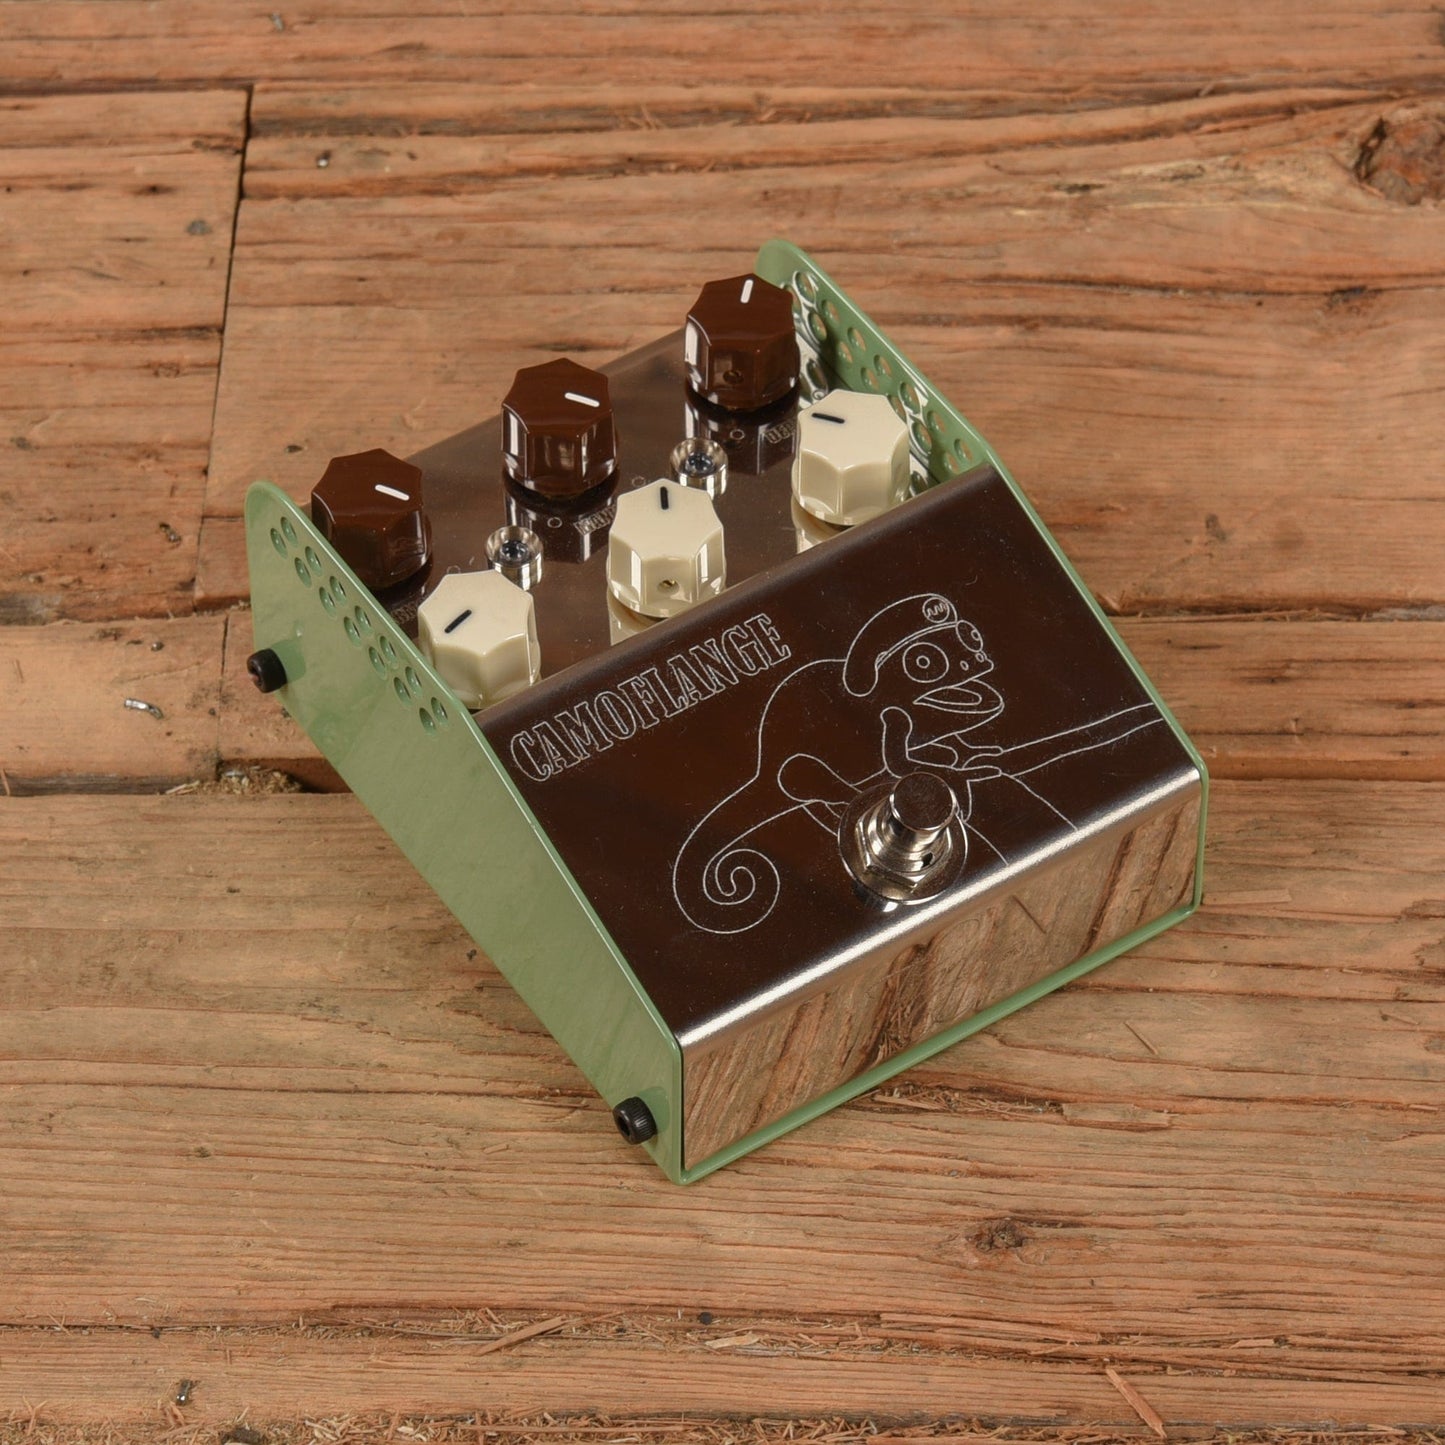 ThorpyFX Camoflange Flanger Effects and Pedals / Flanger